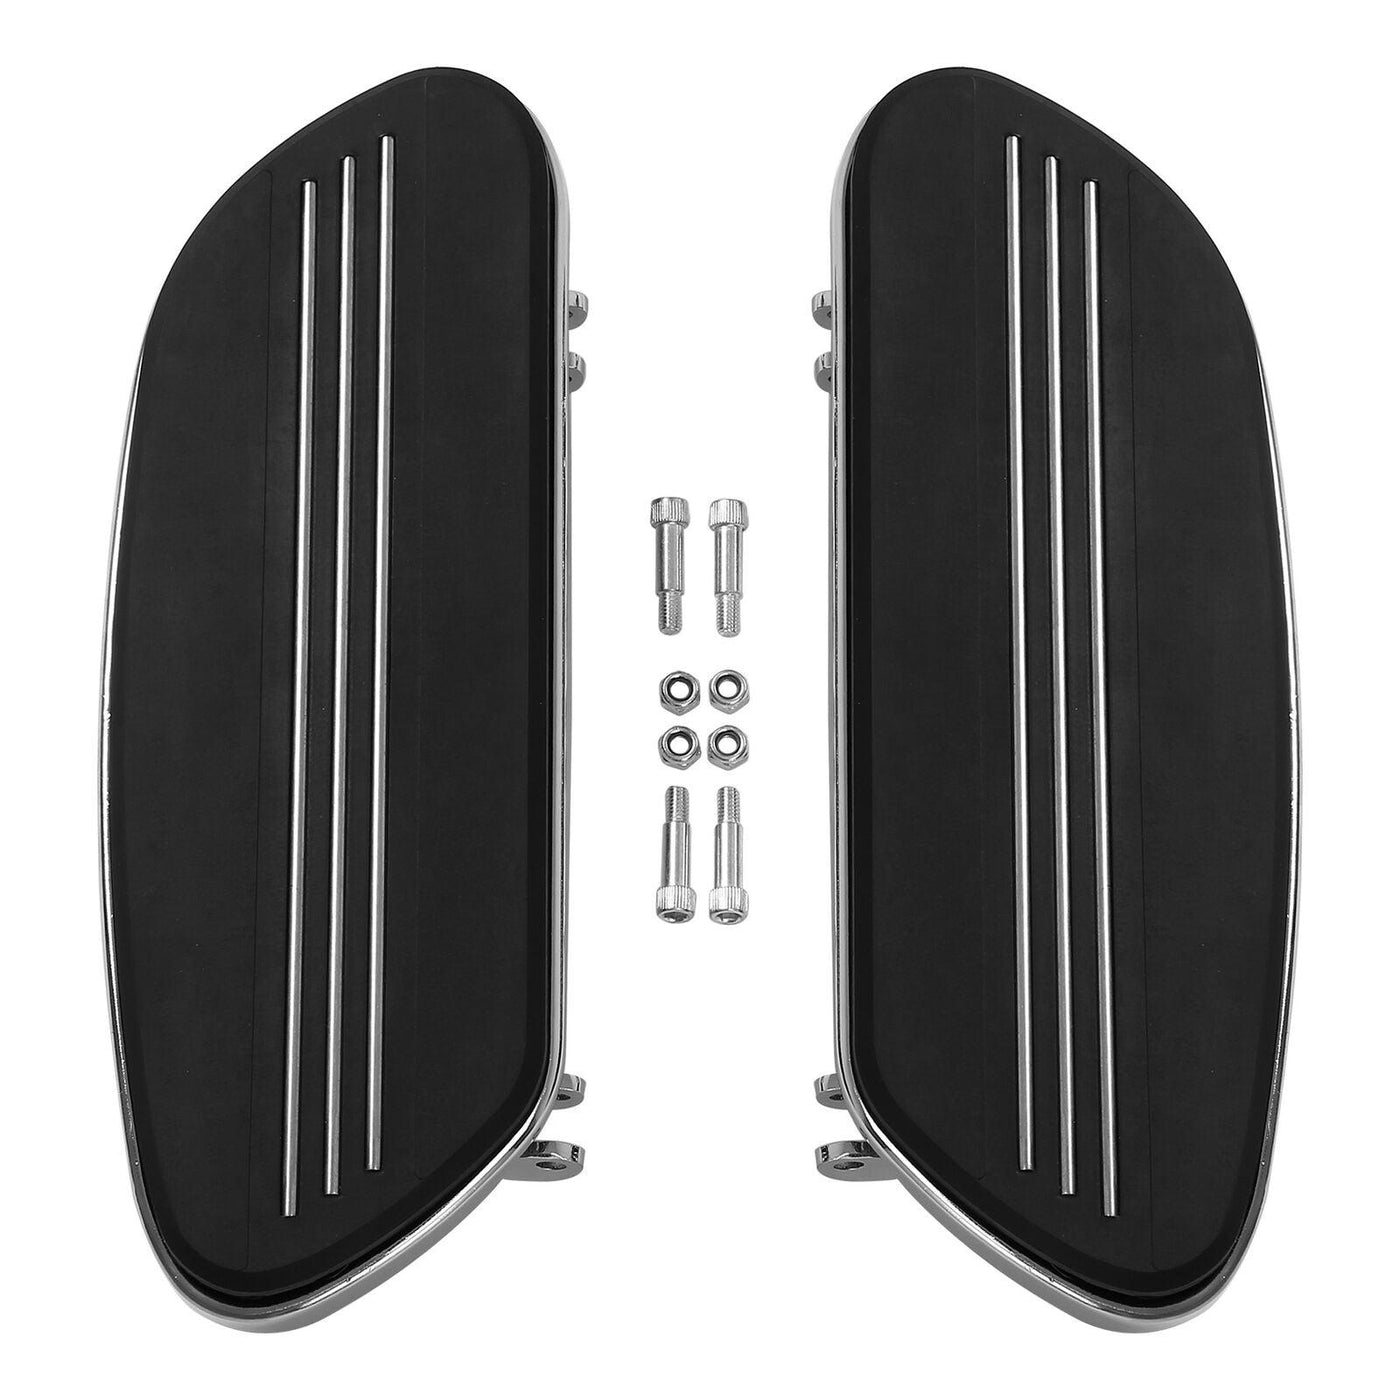 Driver /Passenger Floorboard /Footpeg Pegs Fit For Harley Road King Glide 93-22 - Moto Life Products